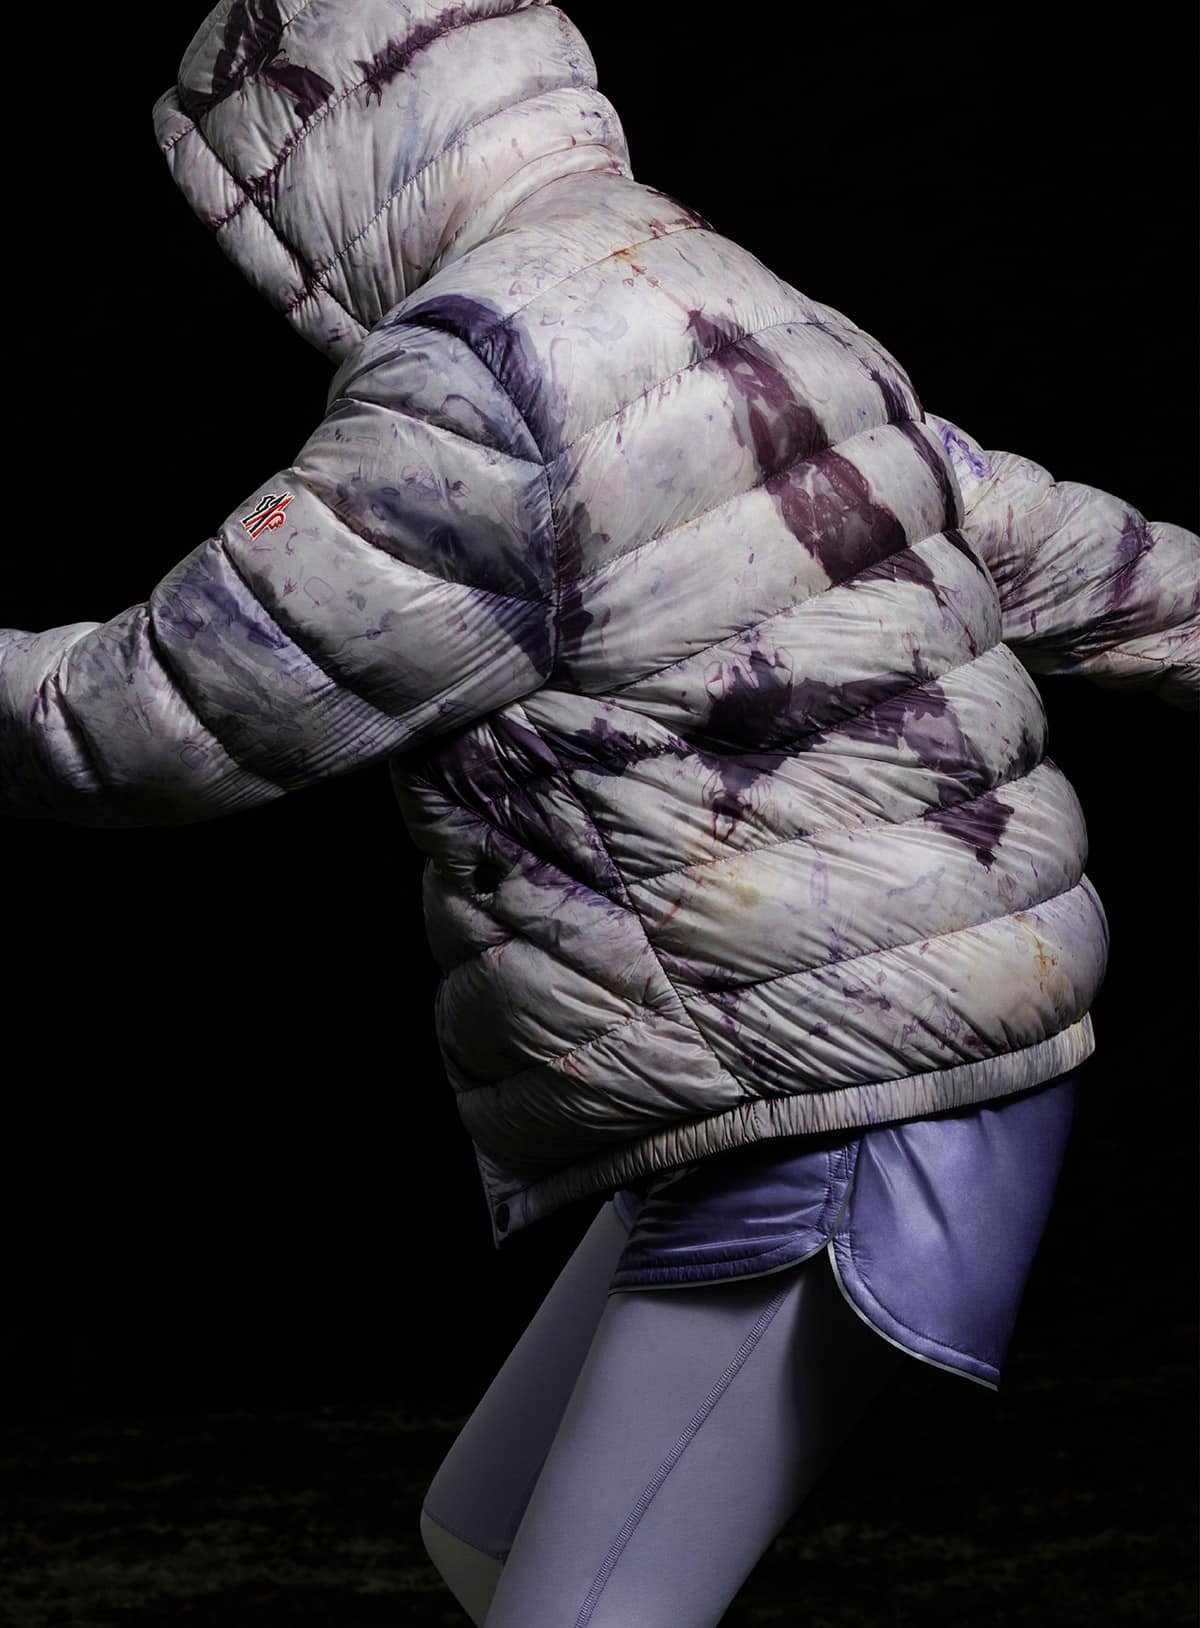 Moncler grenoble lifestyle image puffer jacket on person